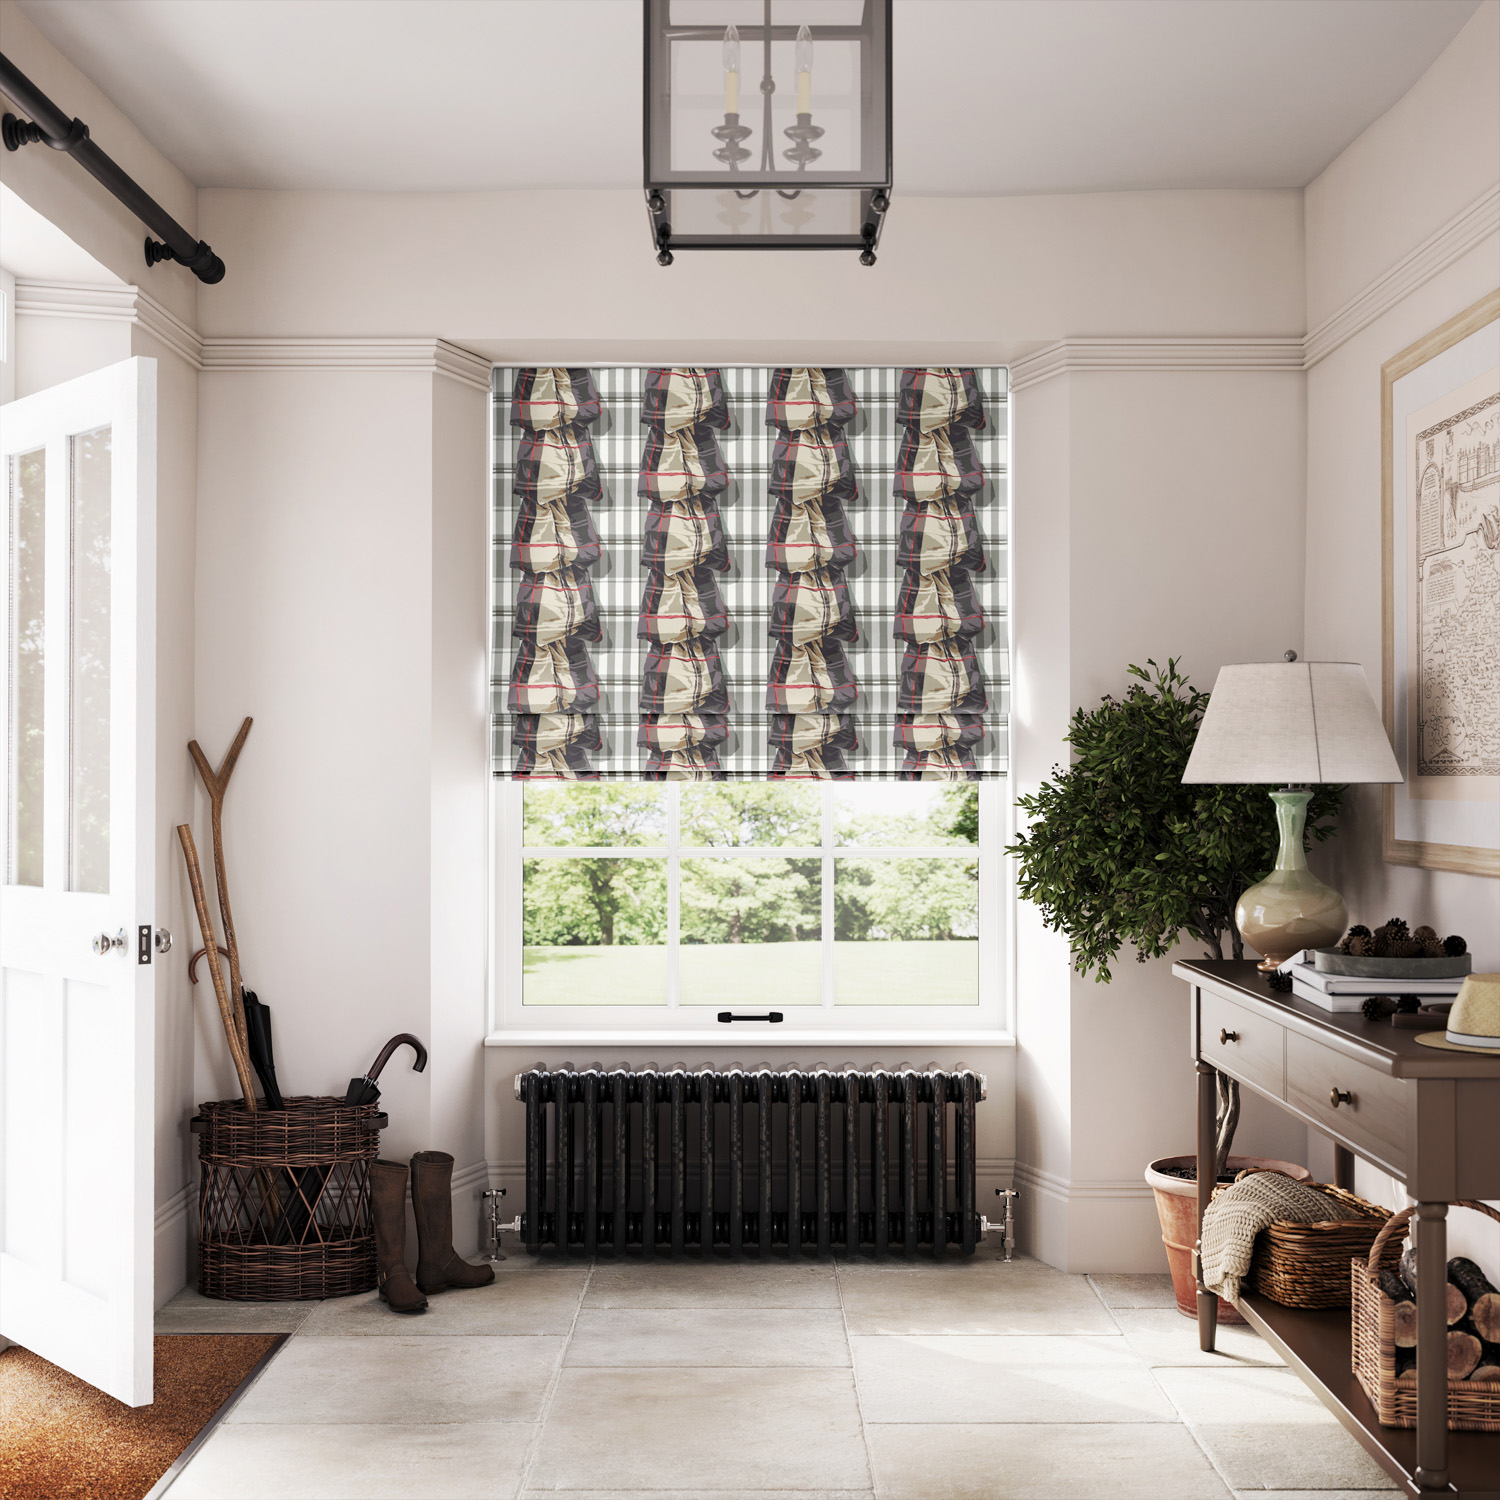 Curiosity Made to Measure Roman Blinds